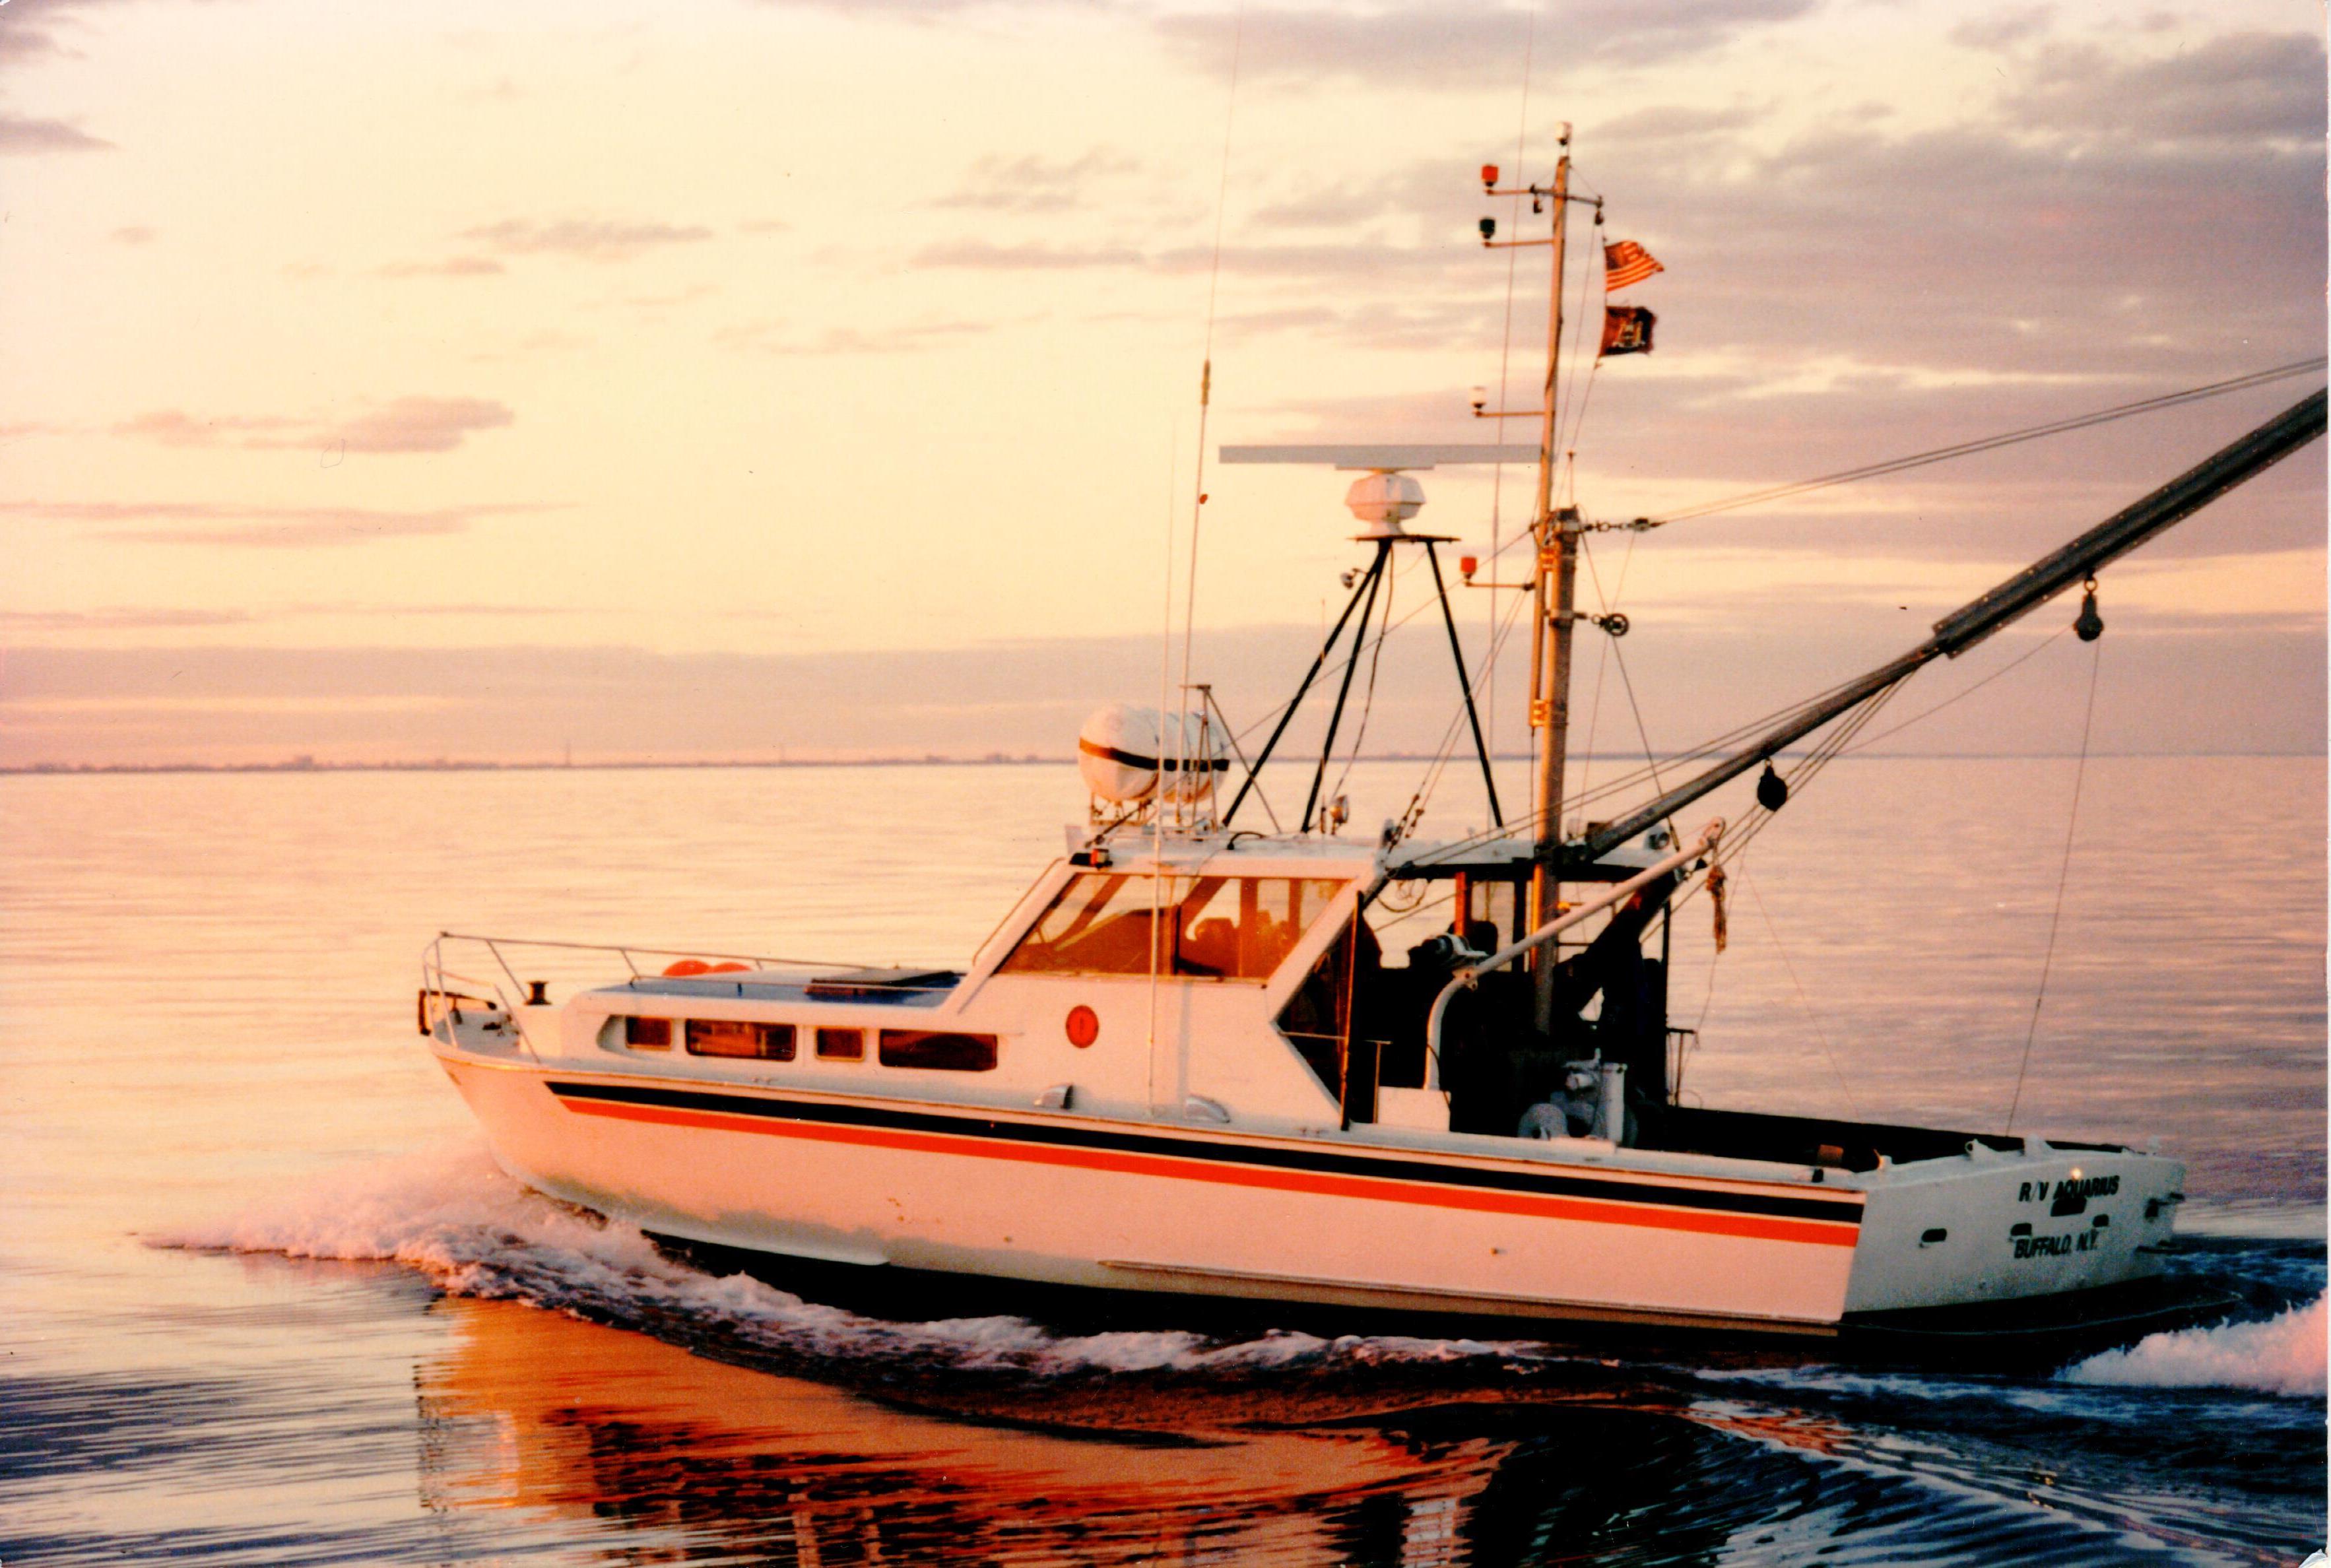 Color picture of a boat at sunset, a white boat with an orange & black stripe. A long boom arm extends from the back